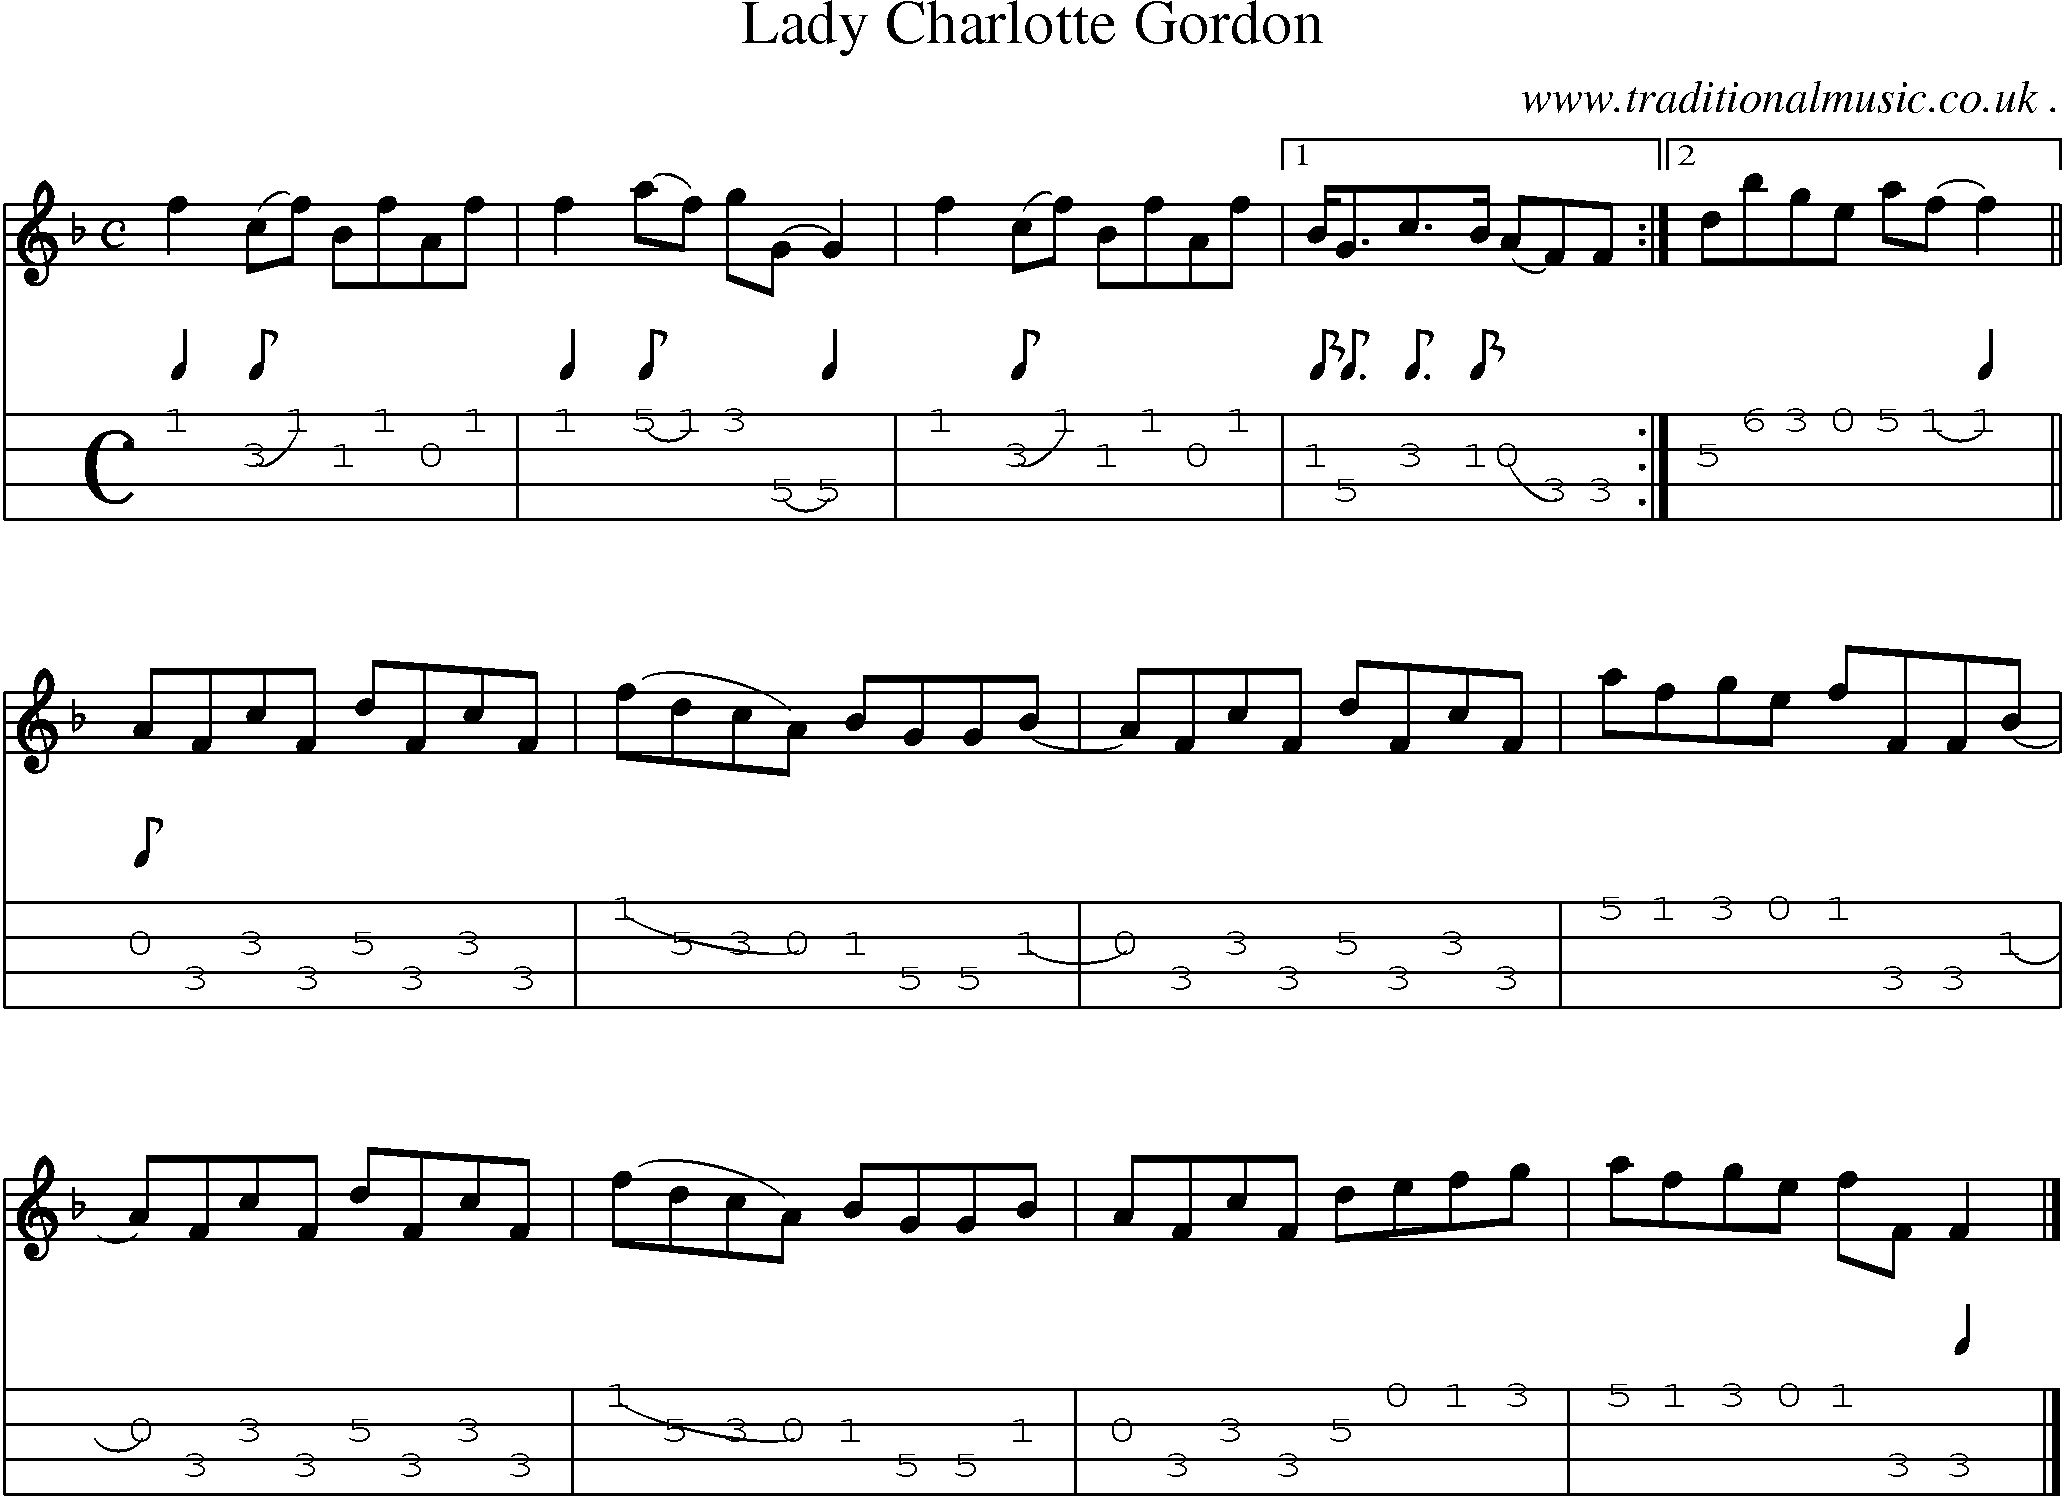 Sheet-music  score, Chords and Mandolin Tabs for Lady Charlotte Gordon